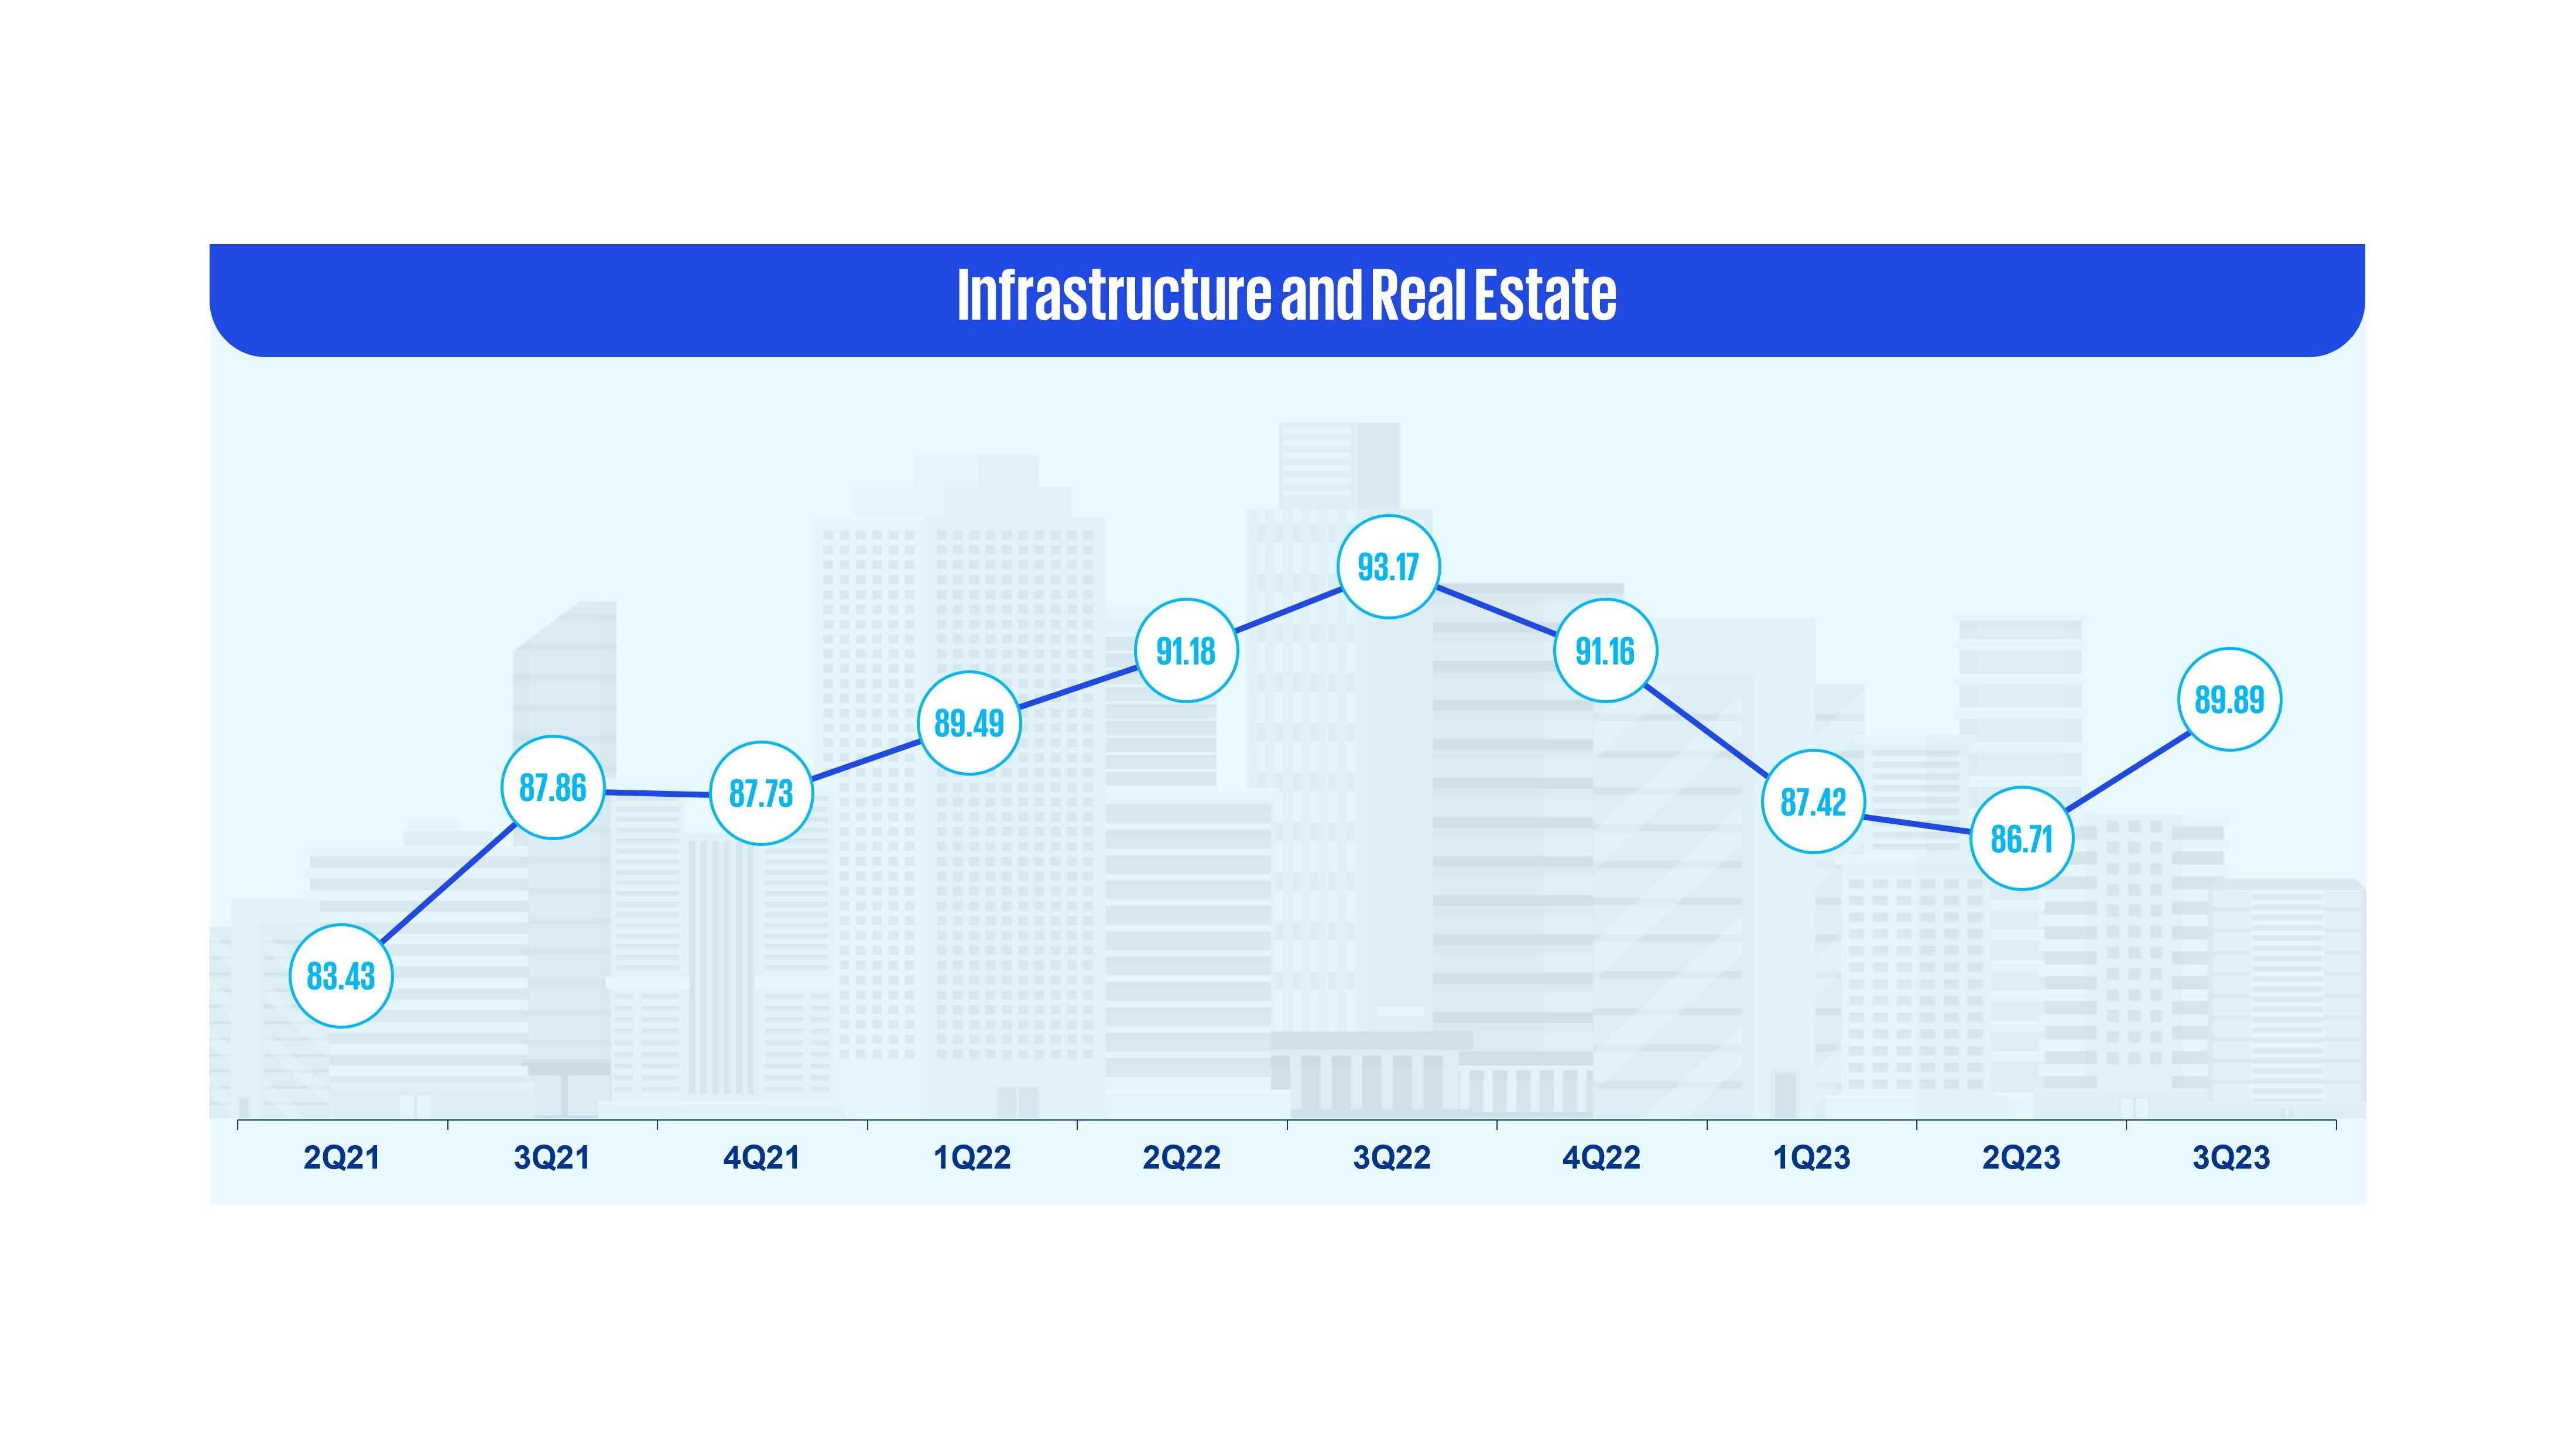 Infrastructure and real estate